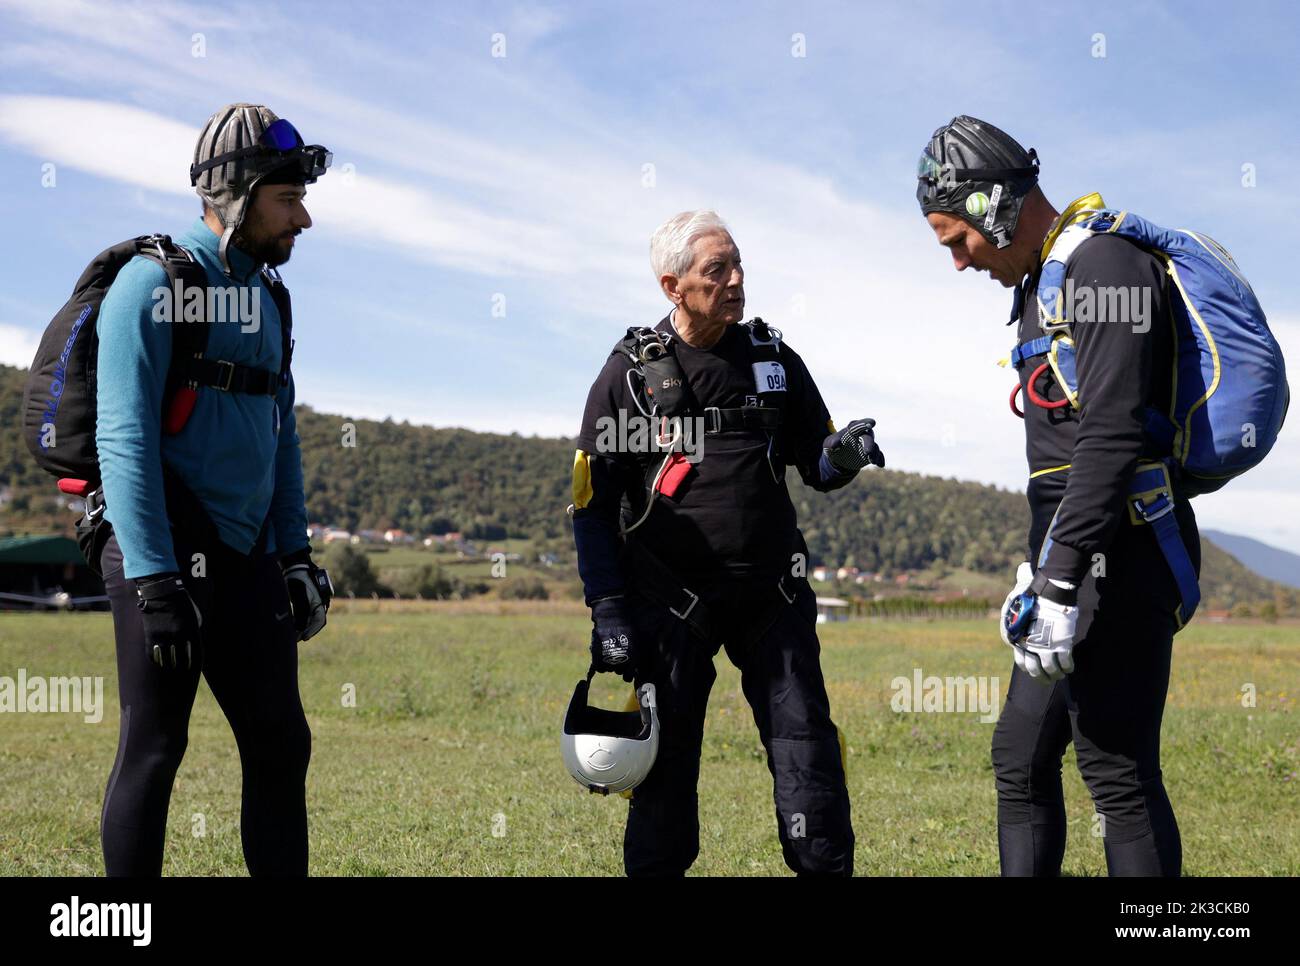 Ibrahim Kalesic, 88-year-old parachuter, speaks with friends before jumping during Para Challenge Cup in Bihac, Bosnia and Herzegovina September 24, 2022. REUTERS/Dado Ruvic Stock Photo